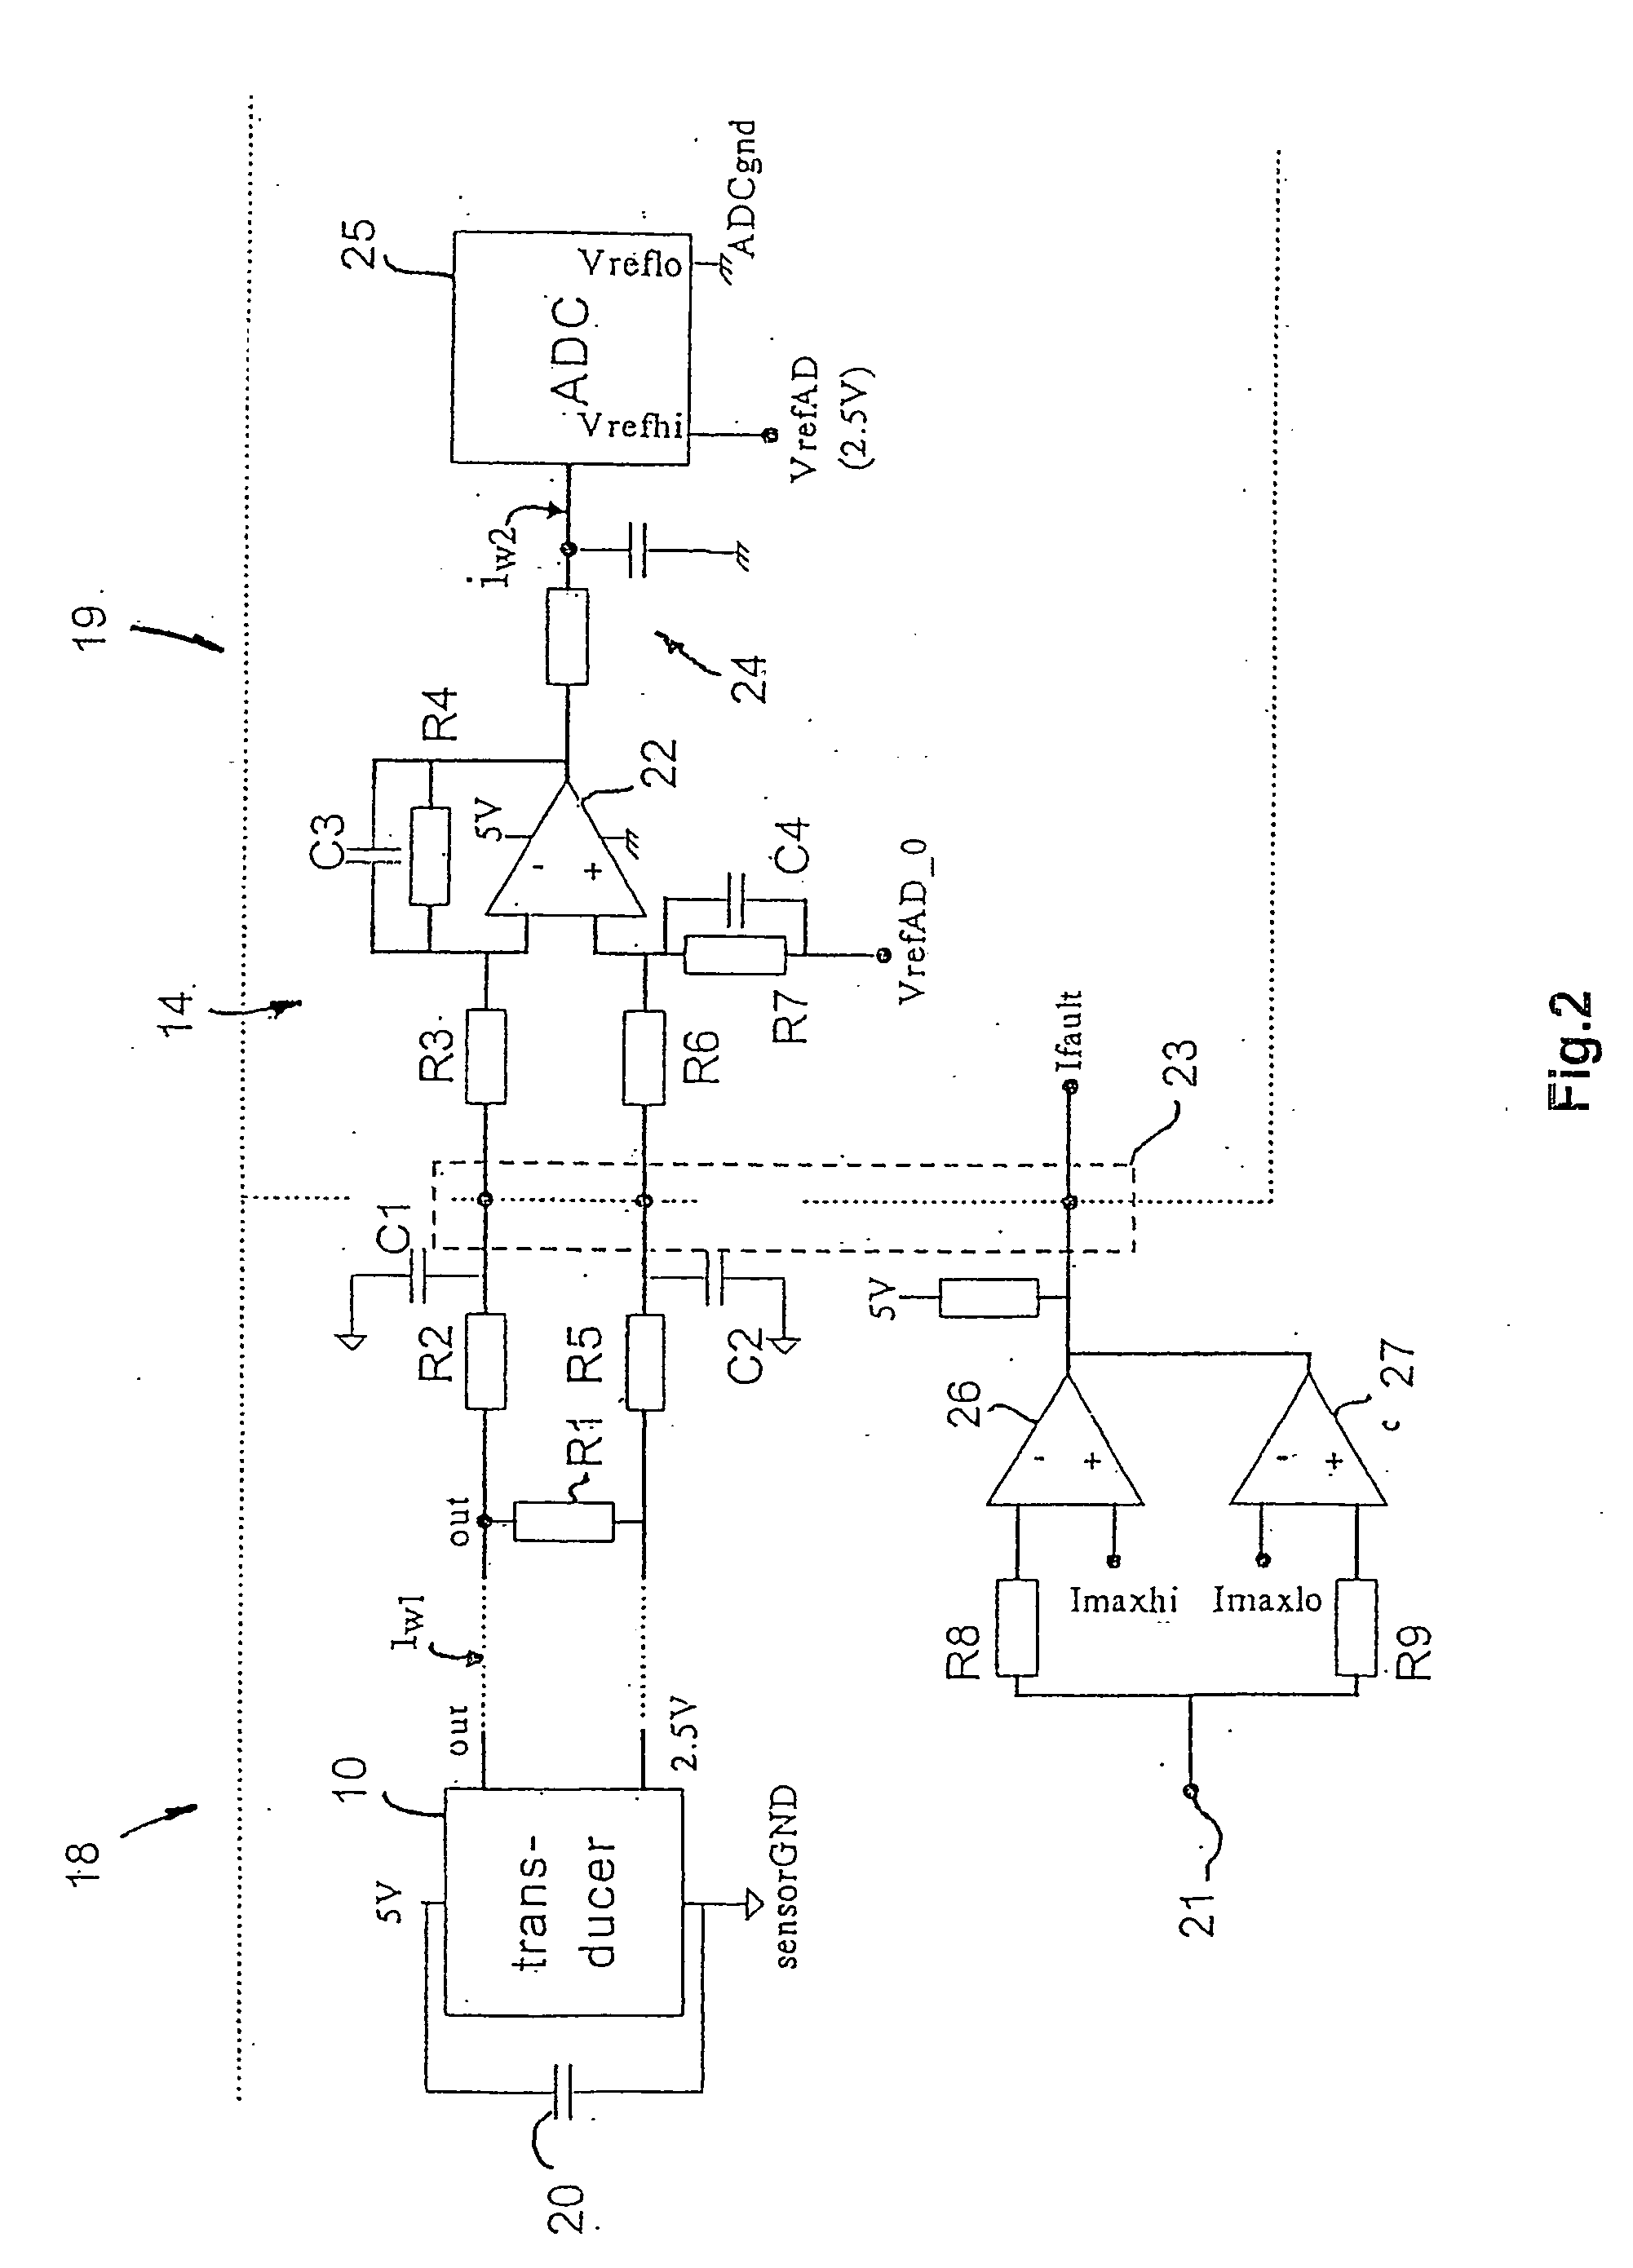 Method for measuring currents in a motor controller and motor controller using such method